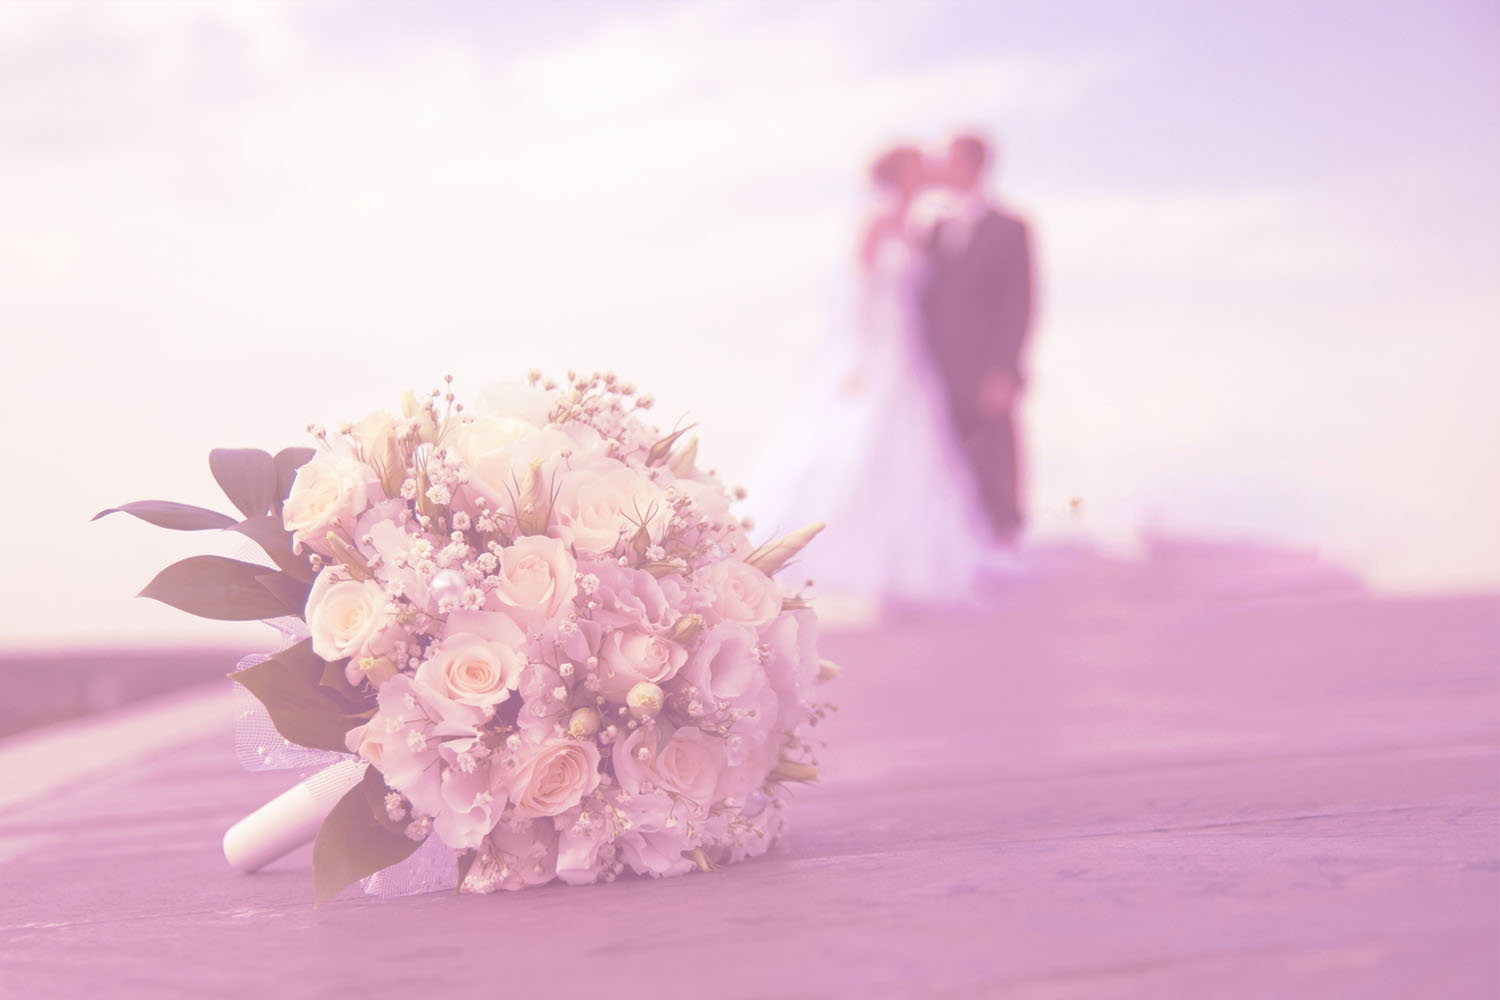 7 first time tips to plan your dream wedding!